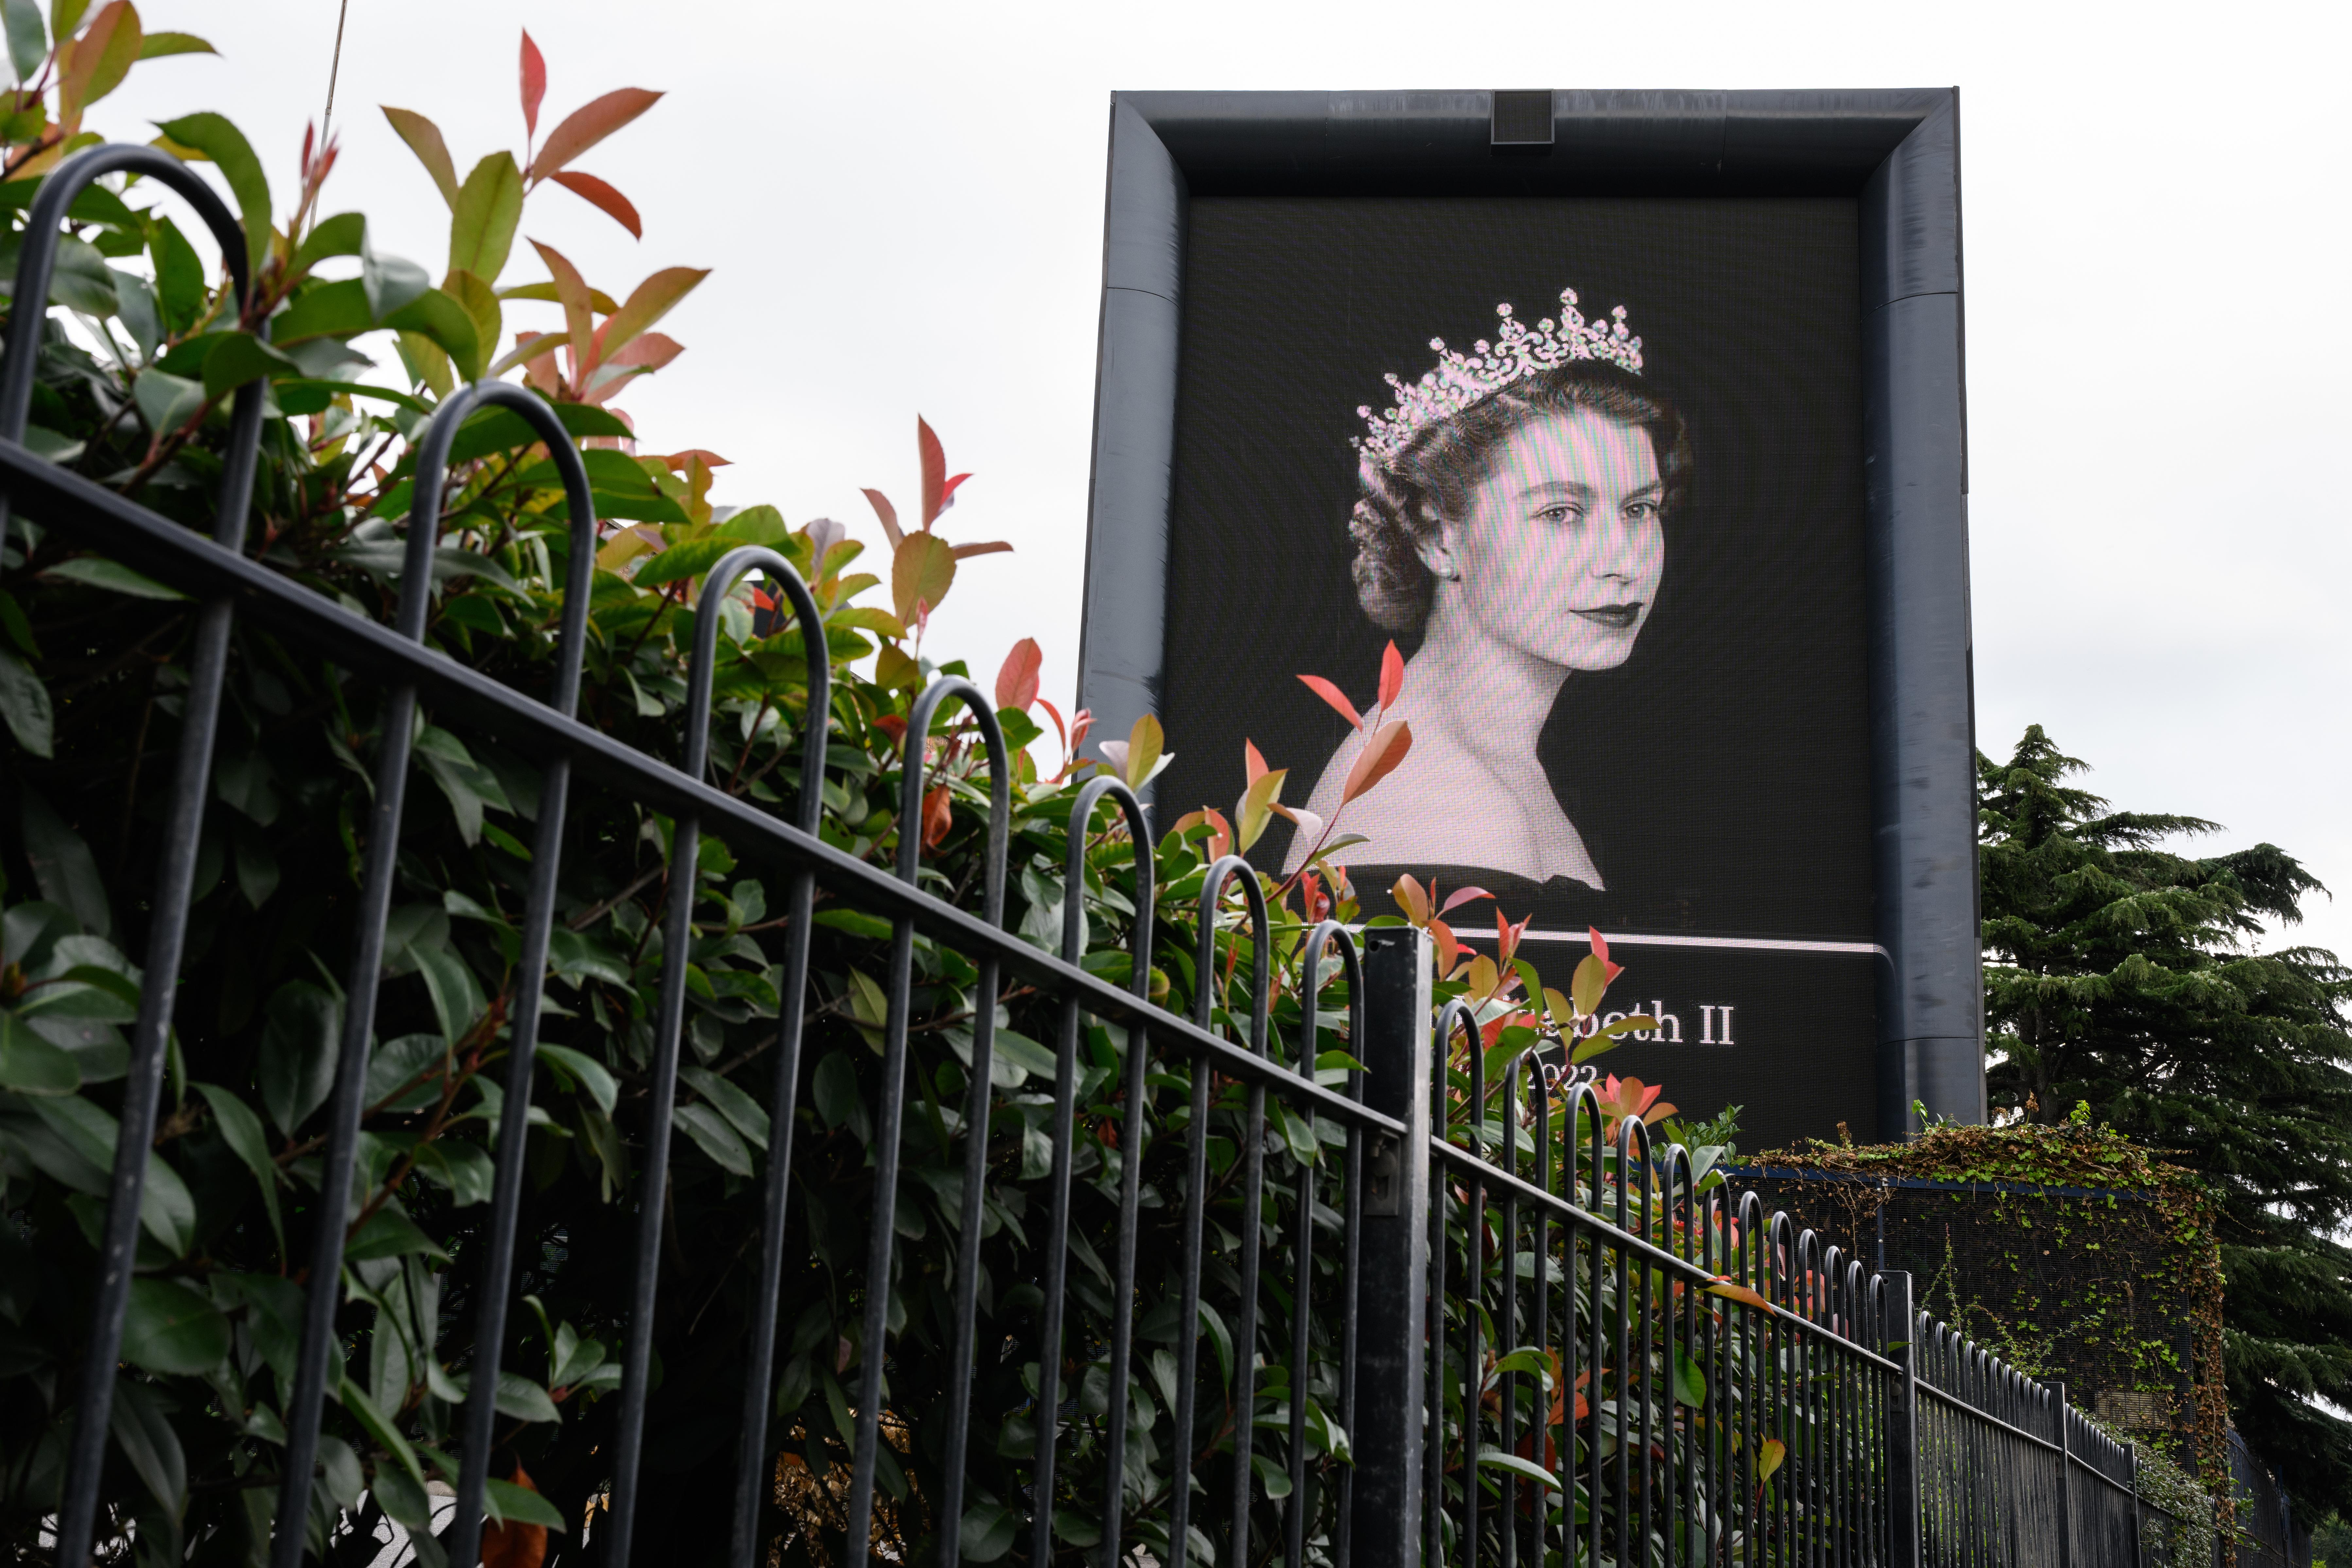 A digital billboard displays a portrait of the late Queen Elizabeth II as the nation enter a period of mourning on September 09, 2022 in London, England.